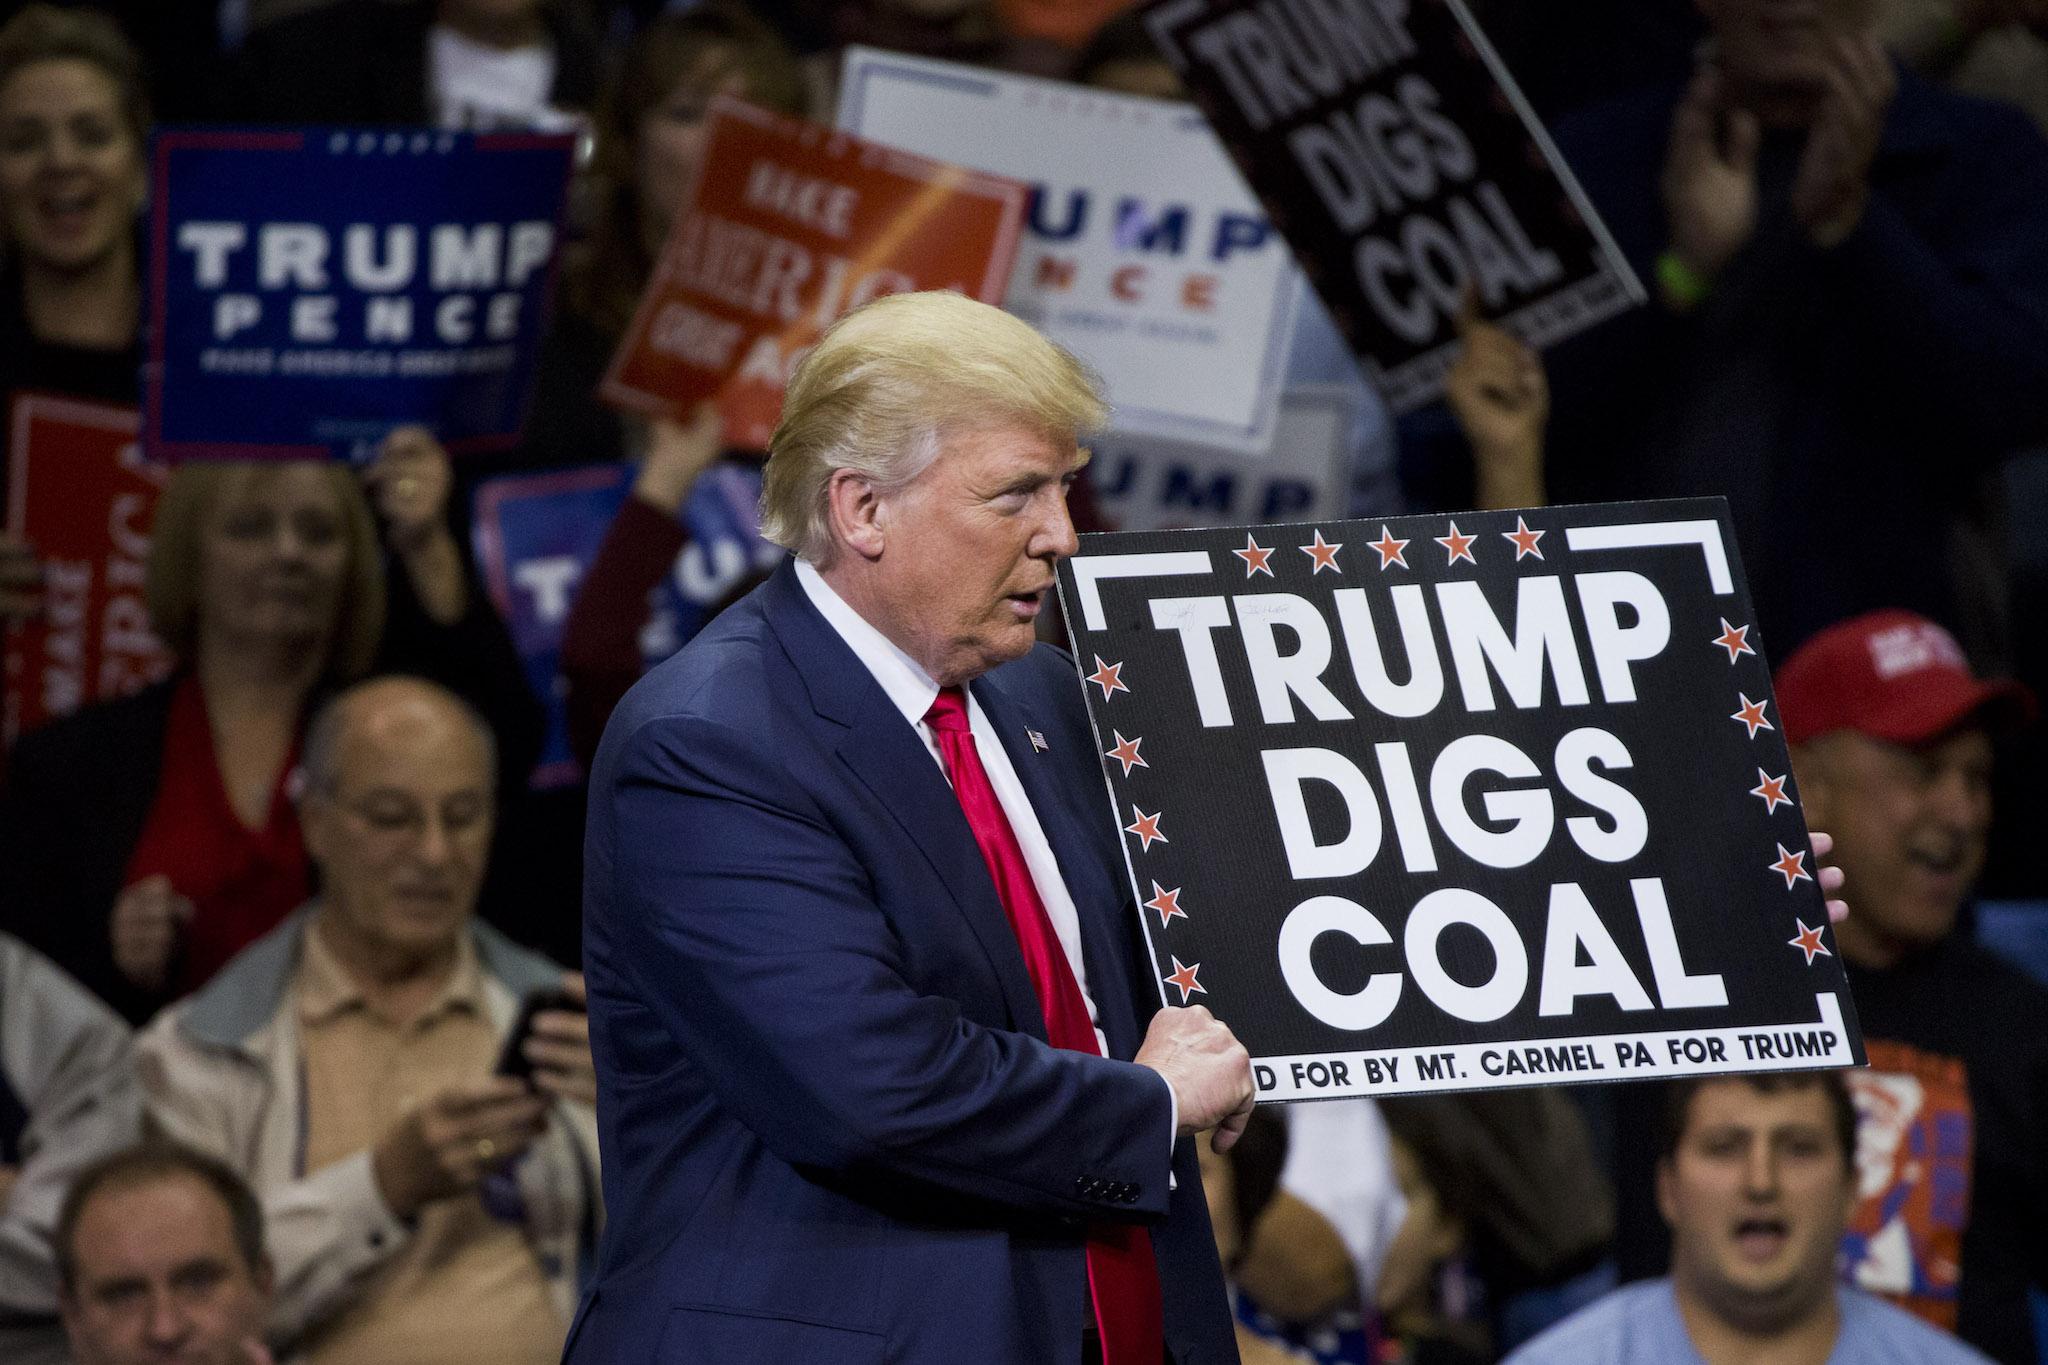 Donald Trump holds a sign supporting the coal industry during a rally in Pennsylvania before he was elected US president